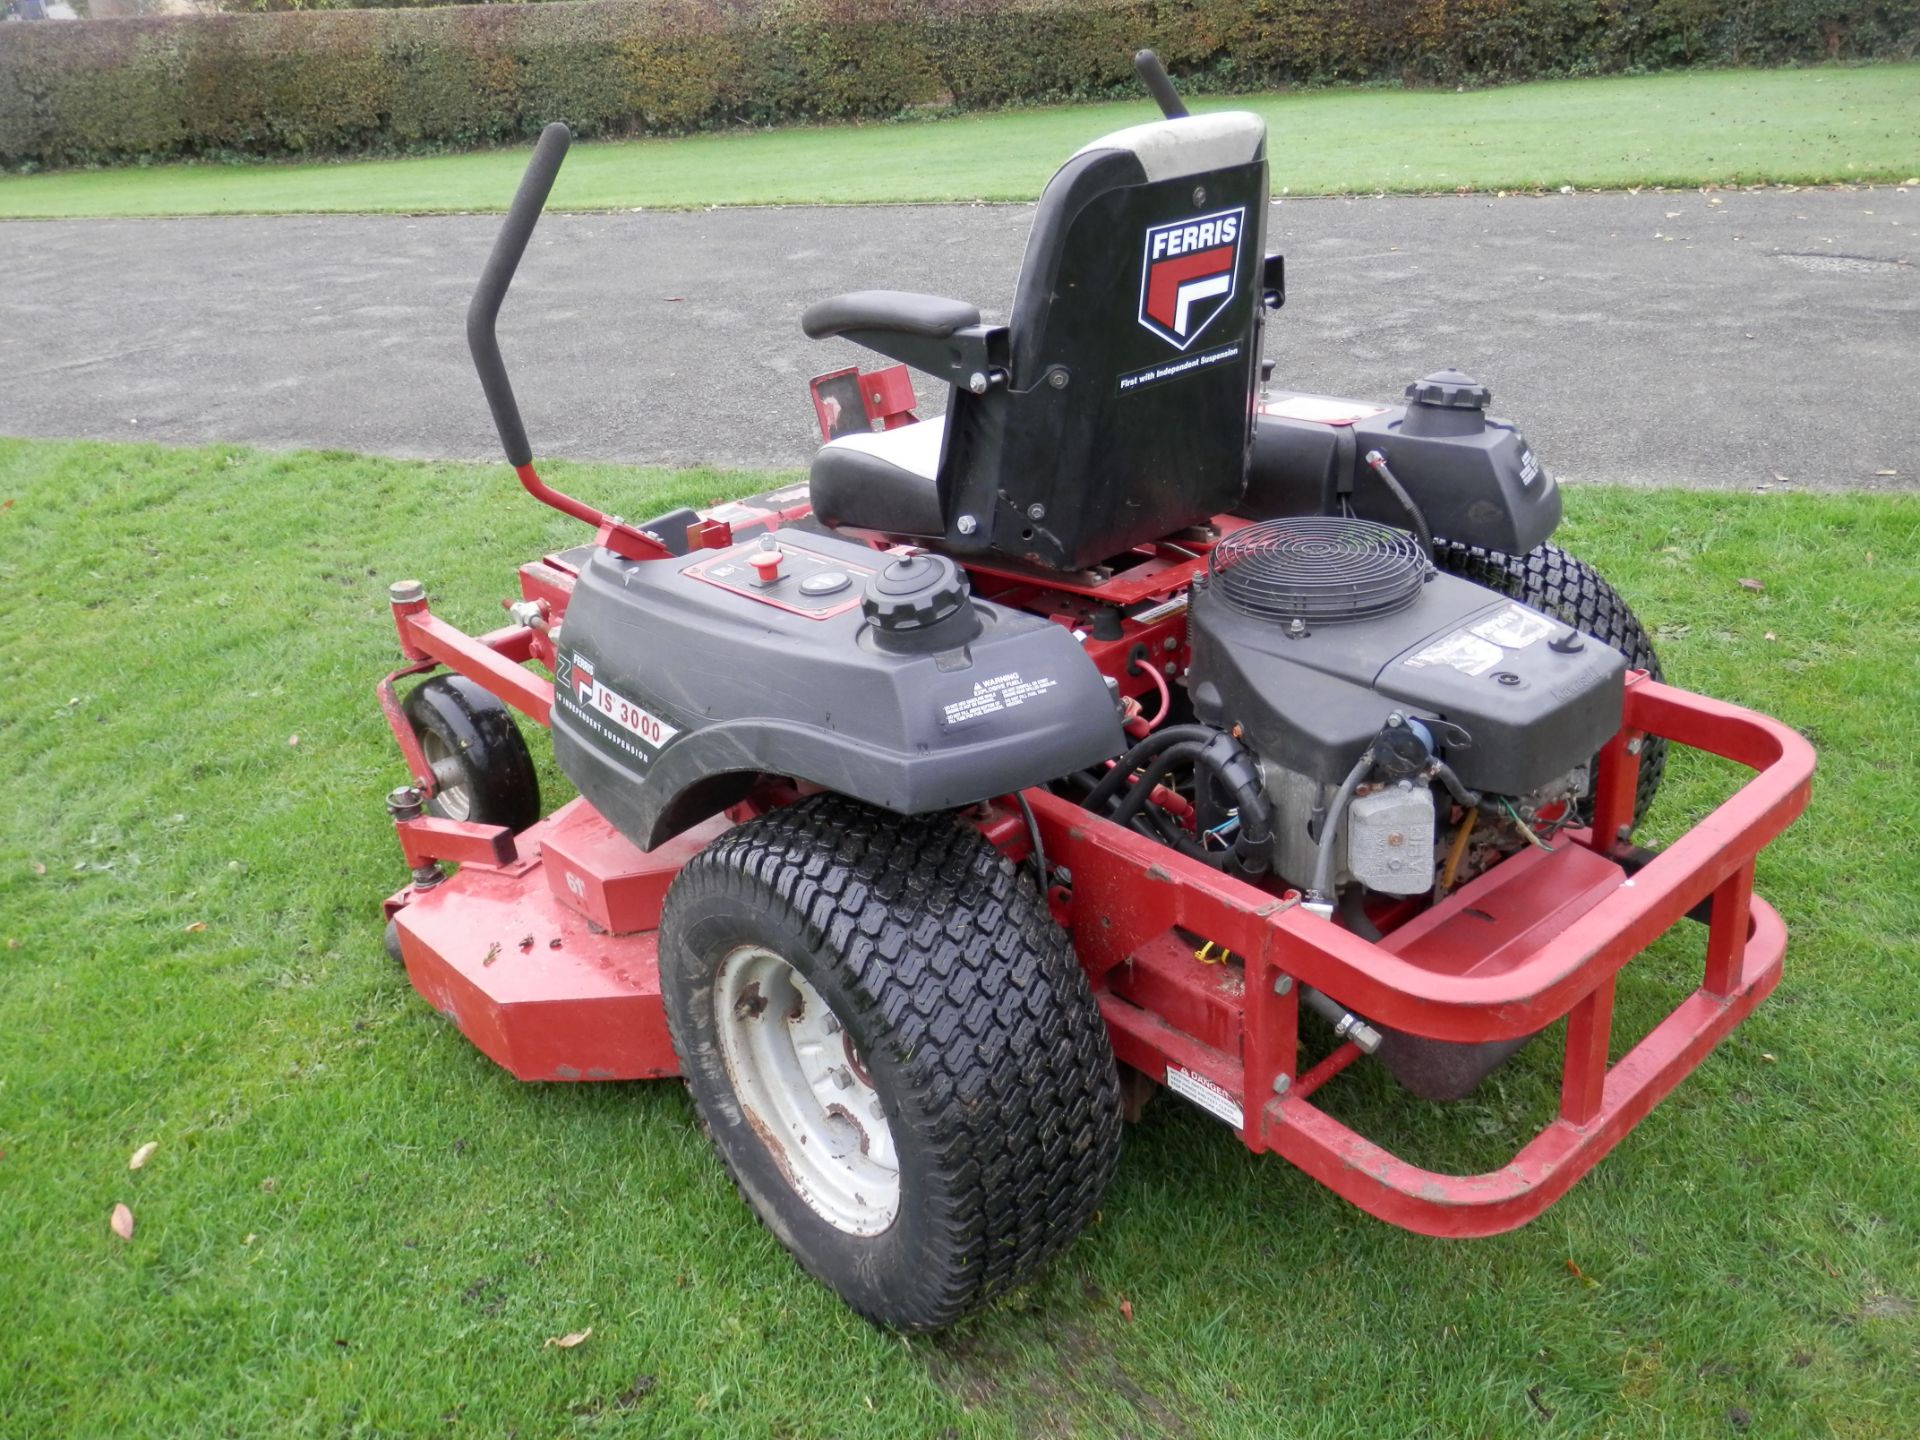 FULLY WORKING FERRIS IS3000 62" CUT RIDE ON ROTARY 25 BHP ENGINED RIDE ON MOWER. - Image 2 of 16